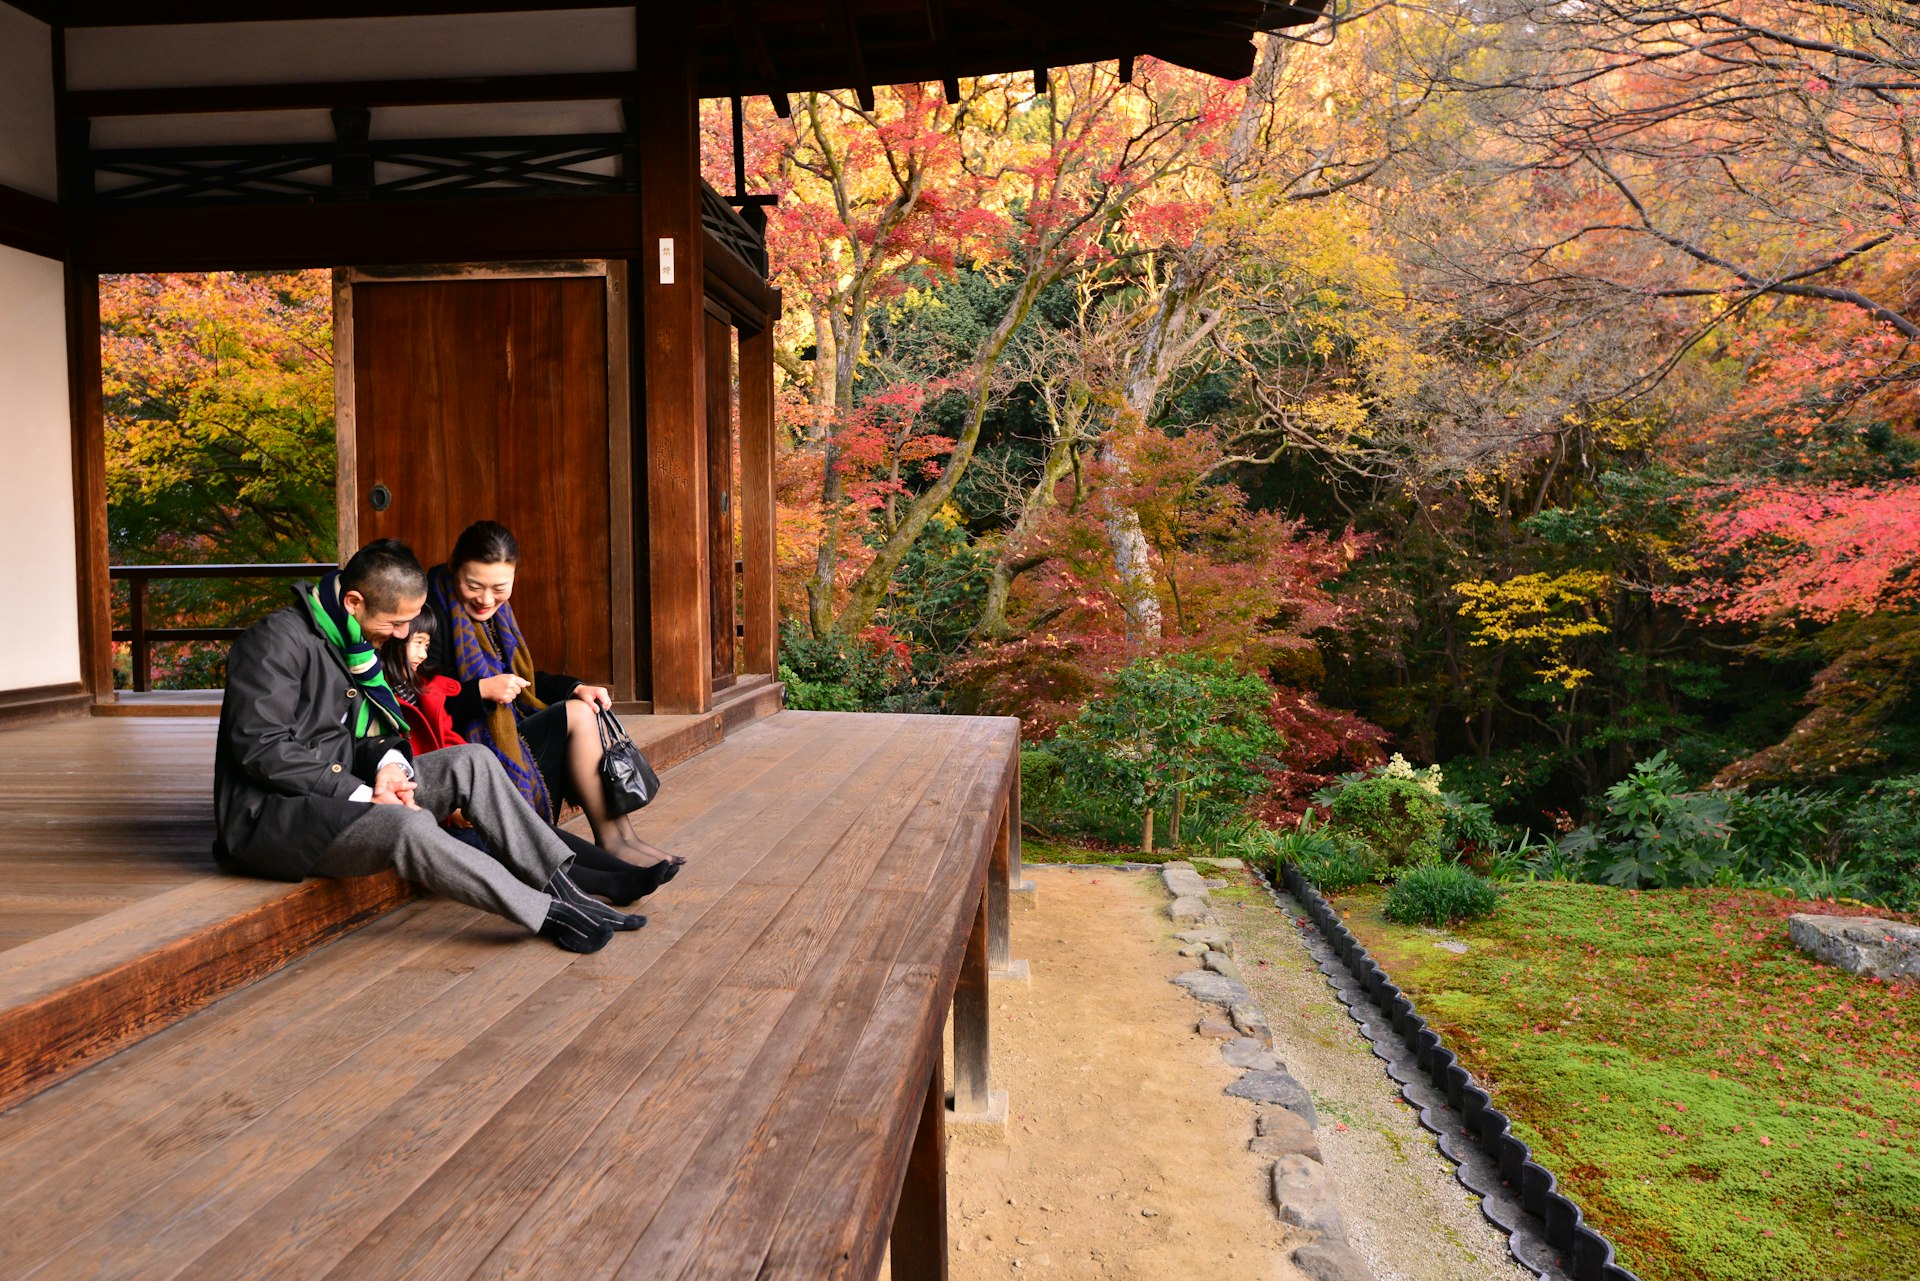 A Japanese family of a father and mother in their 40s and their seven-year-old daughter enjoying autumn foliage at the corridor of Hojo (the living quarters of the head priest) of Tofuku-ji Temple, Kyoto, Japan.